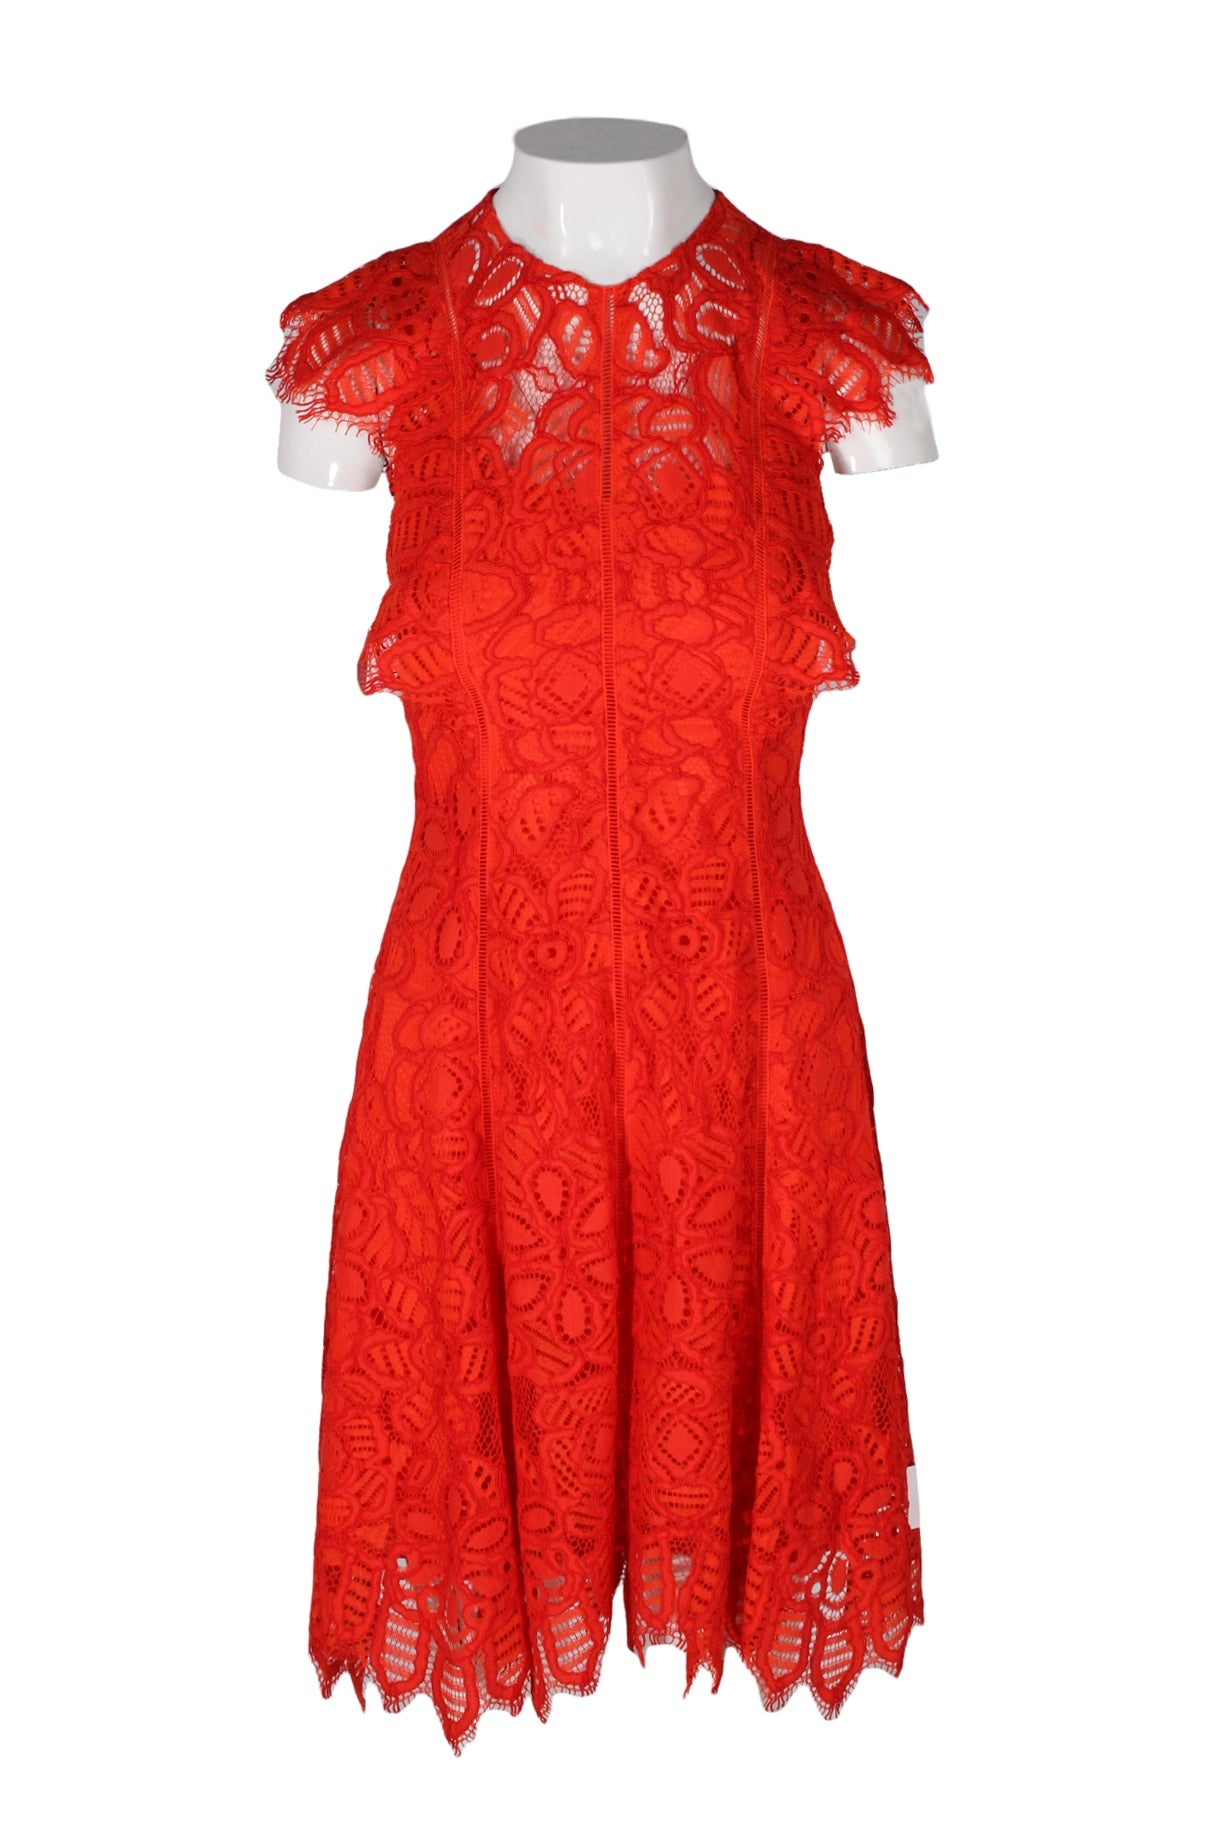 front of lela rose red lace short sleeve midi dress. features floral lace throughout, crew neckline, flutter sleeves, and flowy skirt.